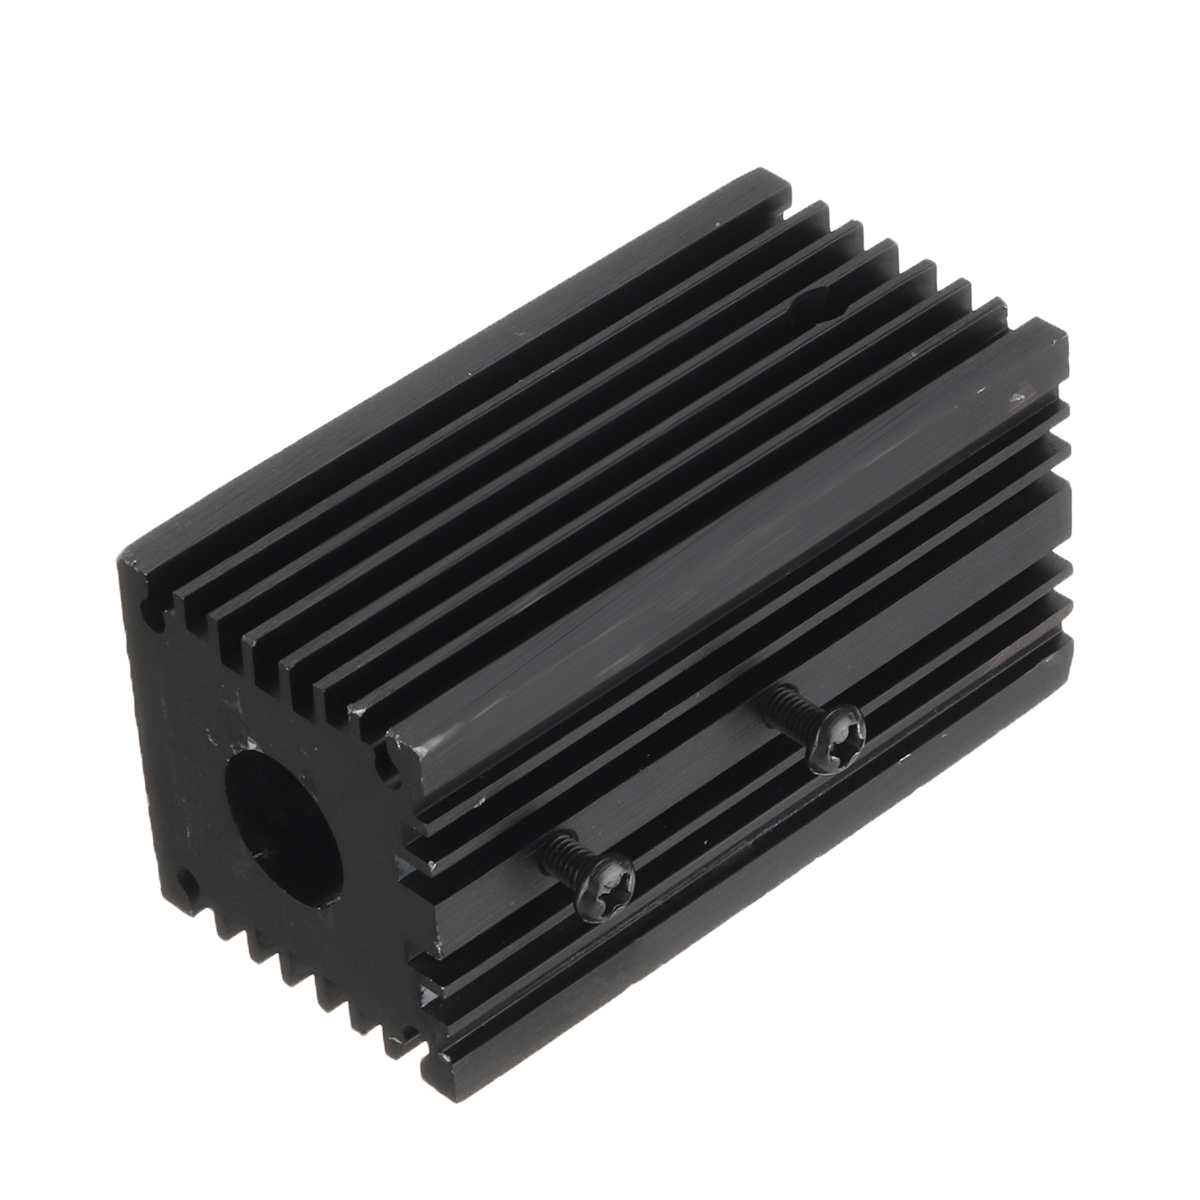 62x32x32mm 12mm Aluminum Heat Sink Groove Fixed Radiator Seat for 12mm Laser Diode Module 8